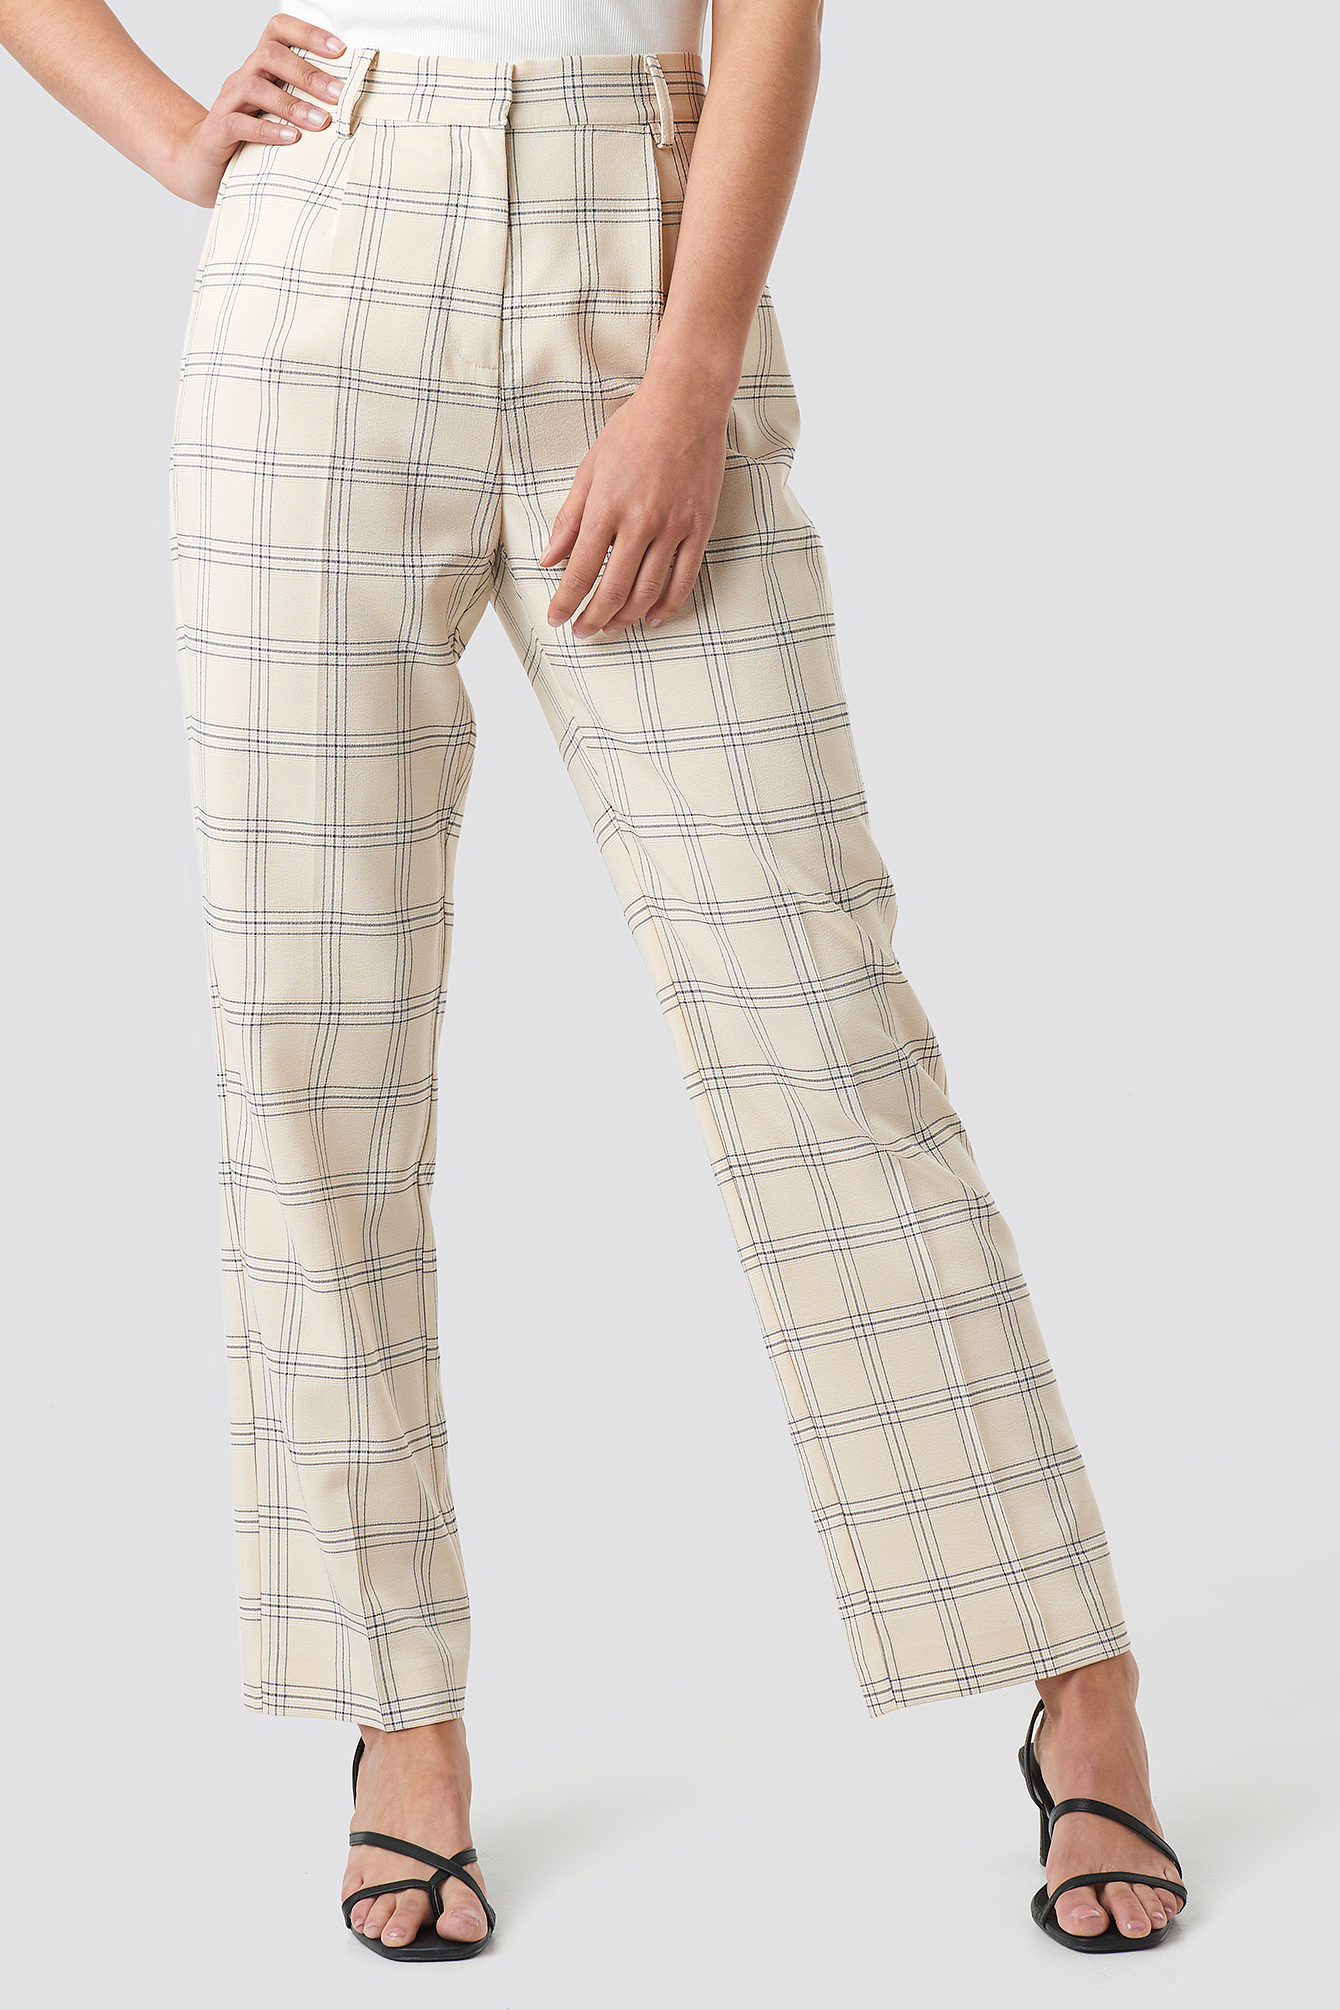 checkered pants and v-neck longsleeves